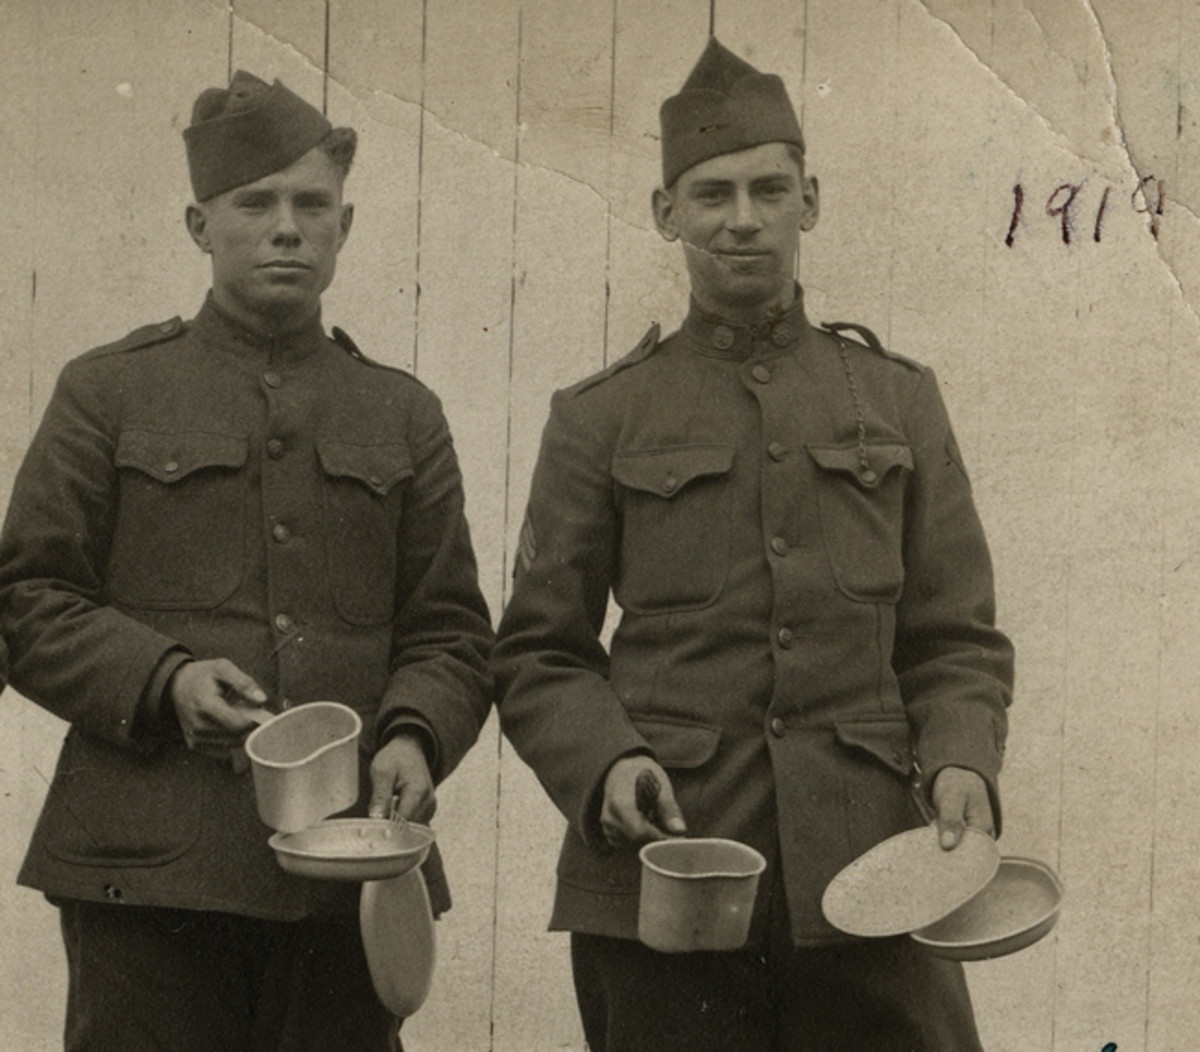  Sgt. Bert Fidler (on right), 39th Infantry Regiment, 4th Division, poses with a friend and his new mess kit. He wrote home and talked about machine gun fire “riddling my pack. The mess kit in my pack was shot full of holes, my corn willy and hard tack was shot to pieces and I didn’t have anything to eat for nearly 3 days.” Courtesy Matt Fidler